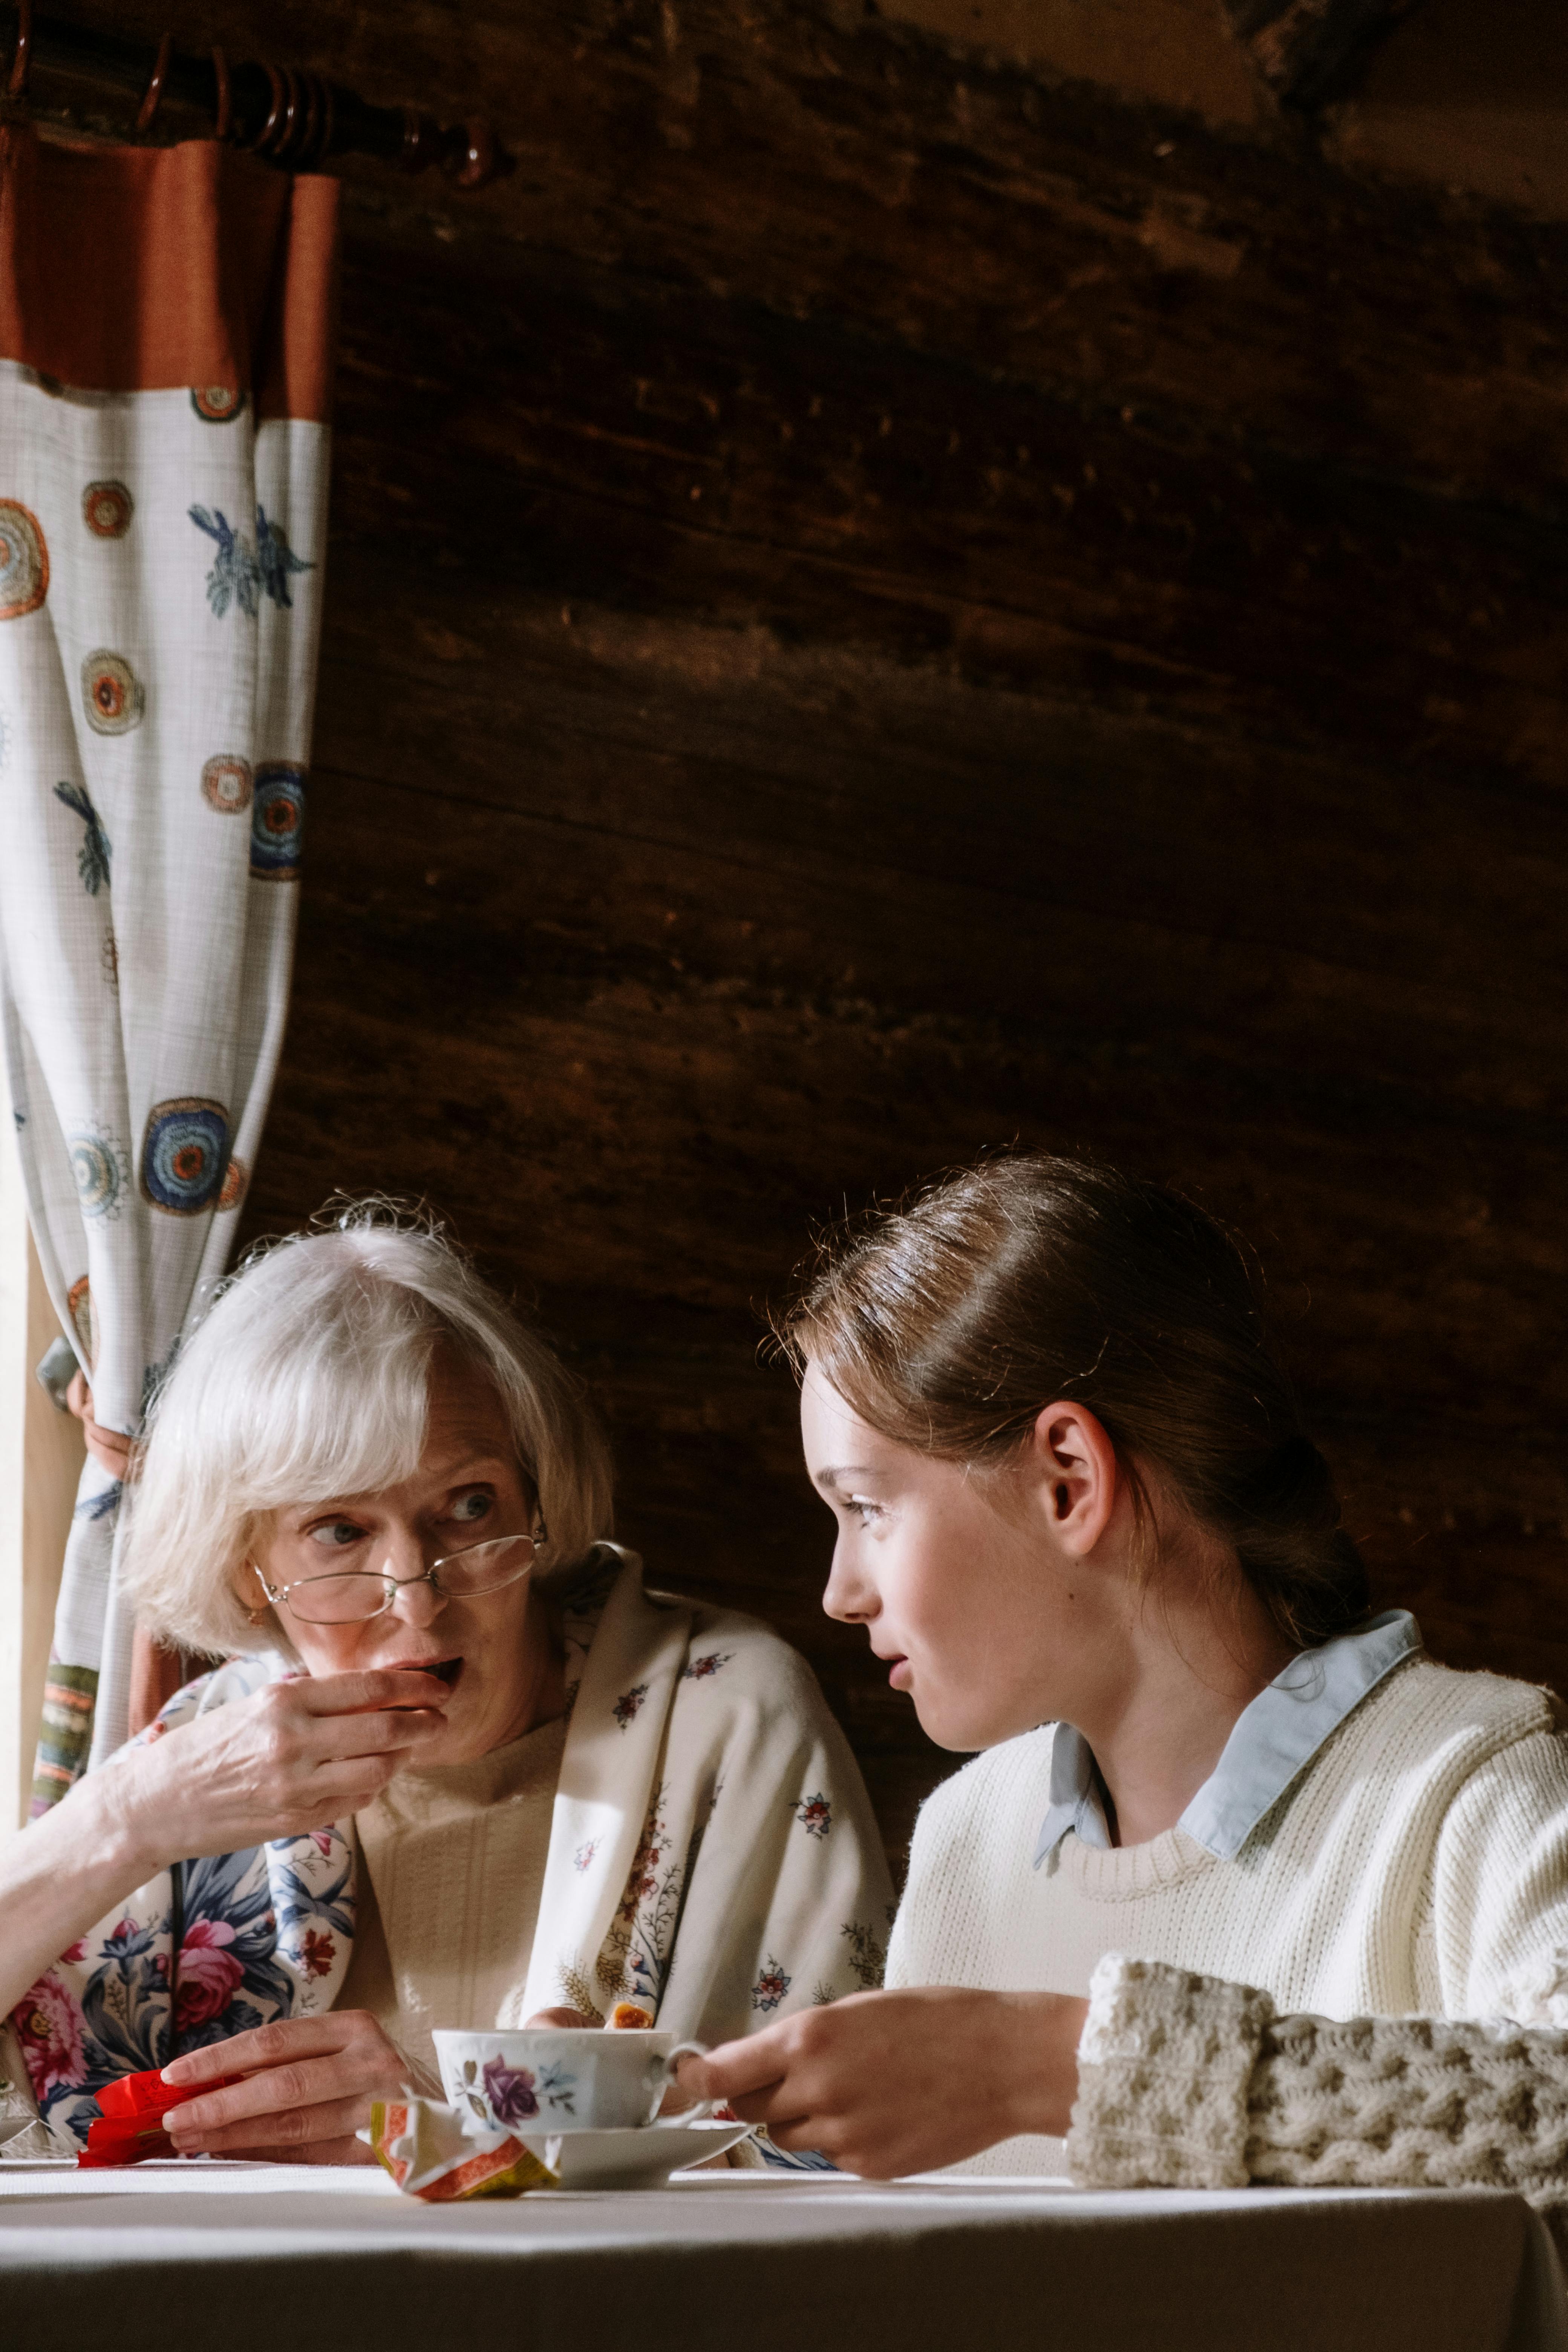 A senior woman and a younger woman talking seriously | Source: Pexels